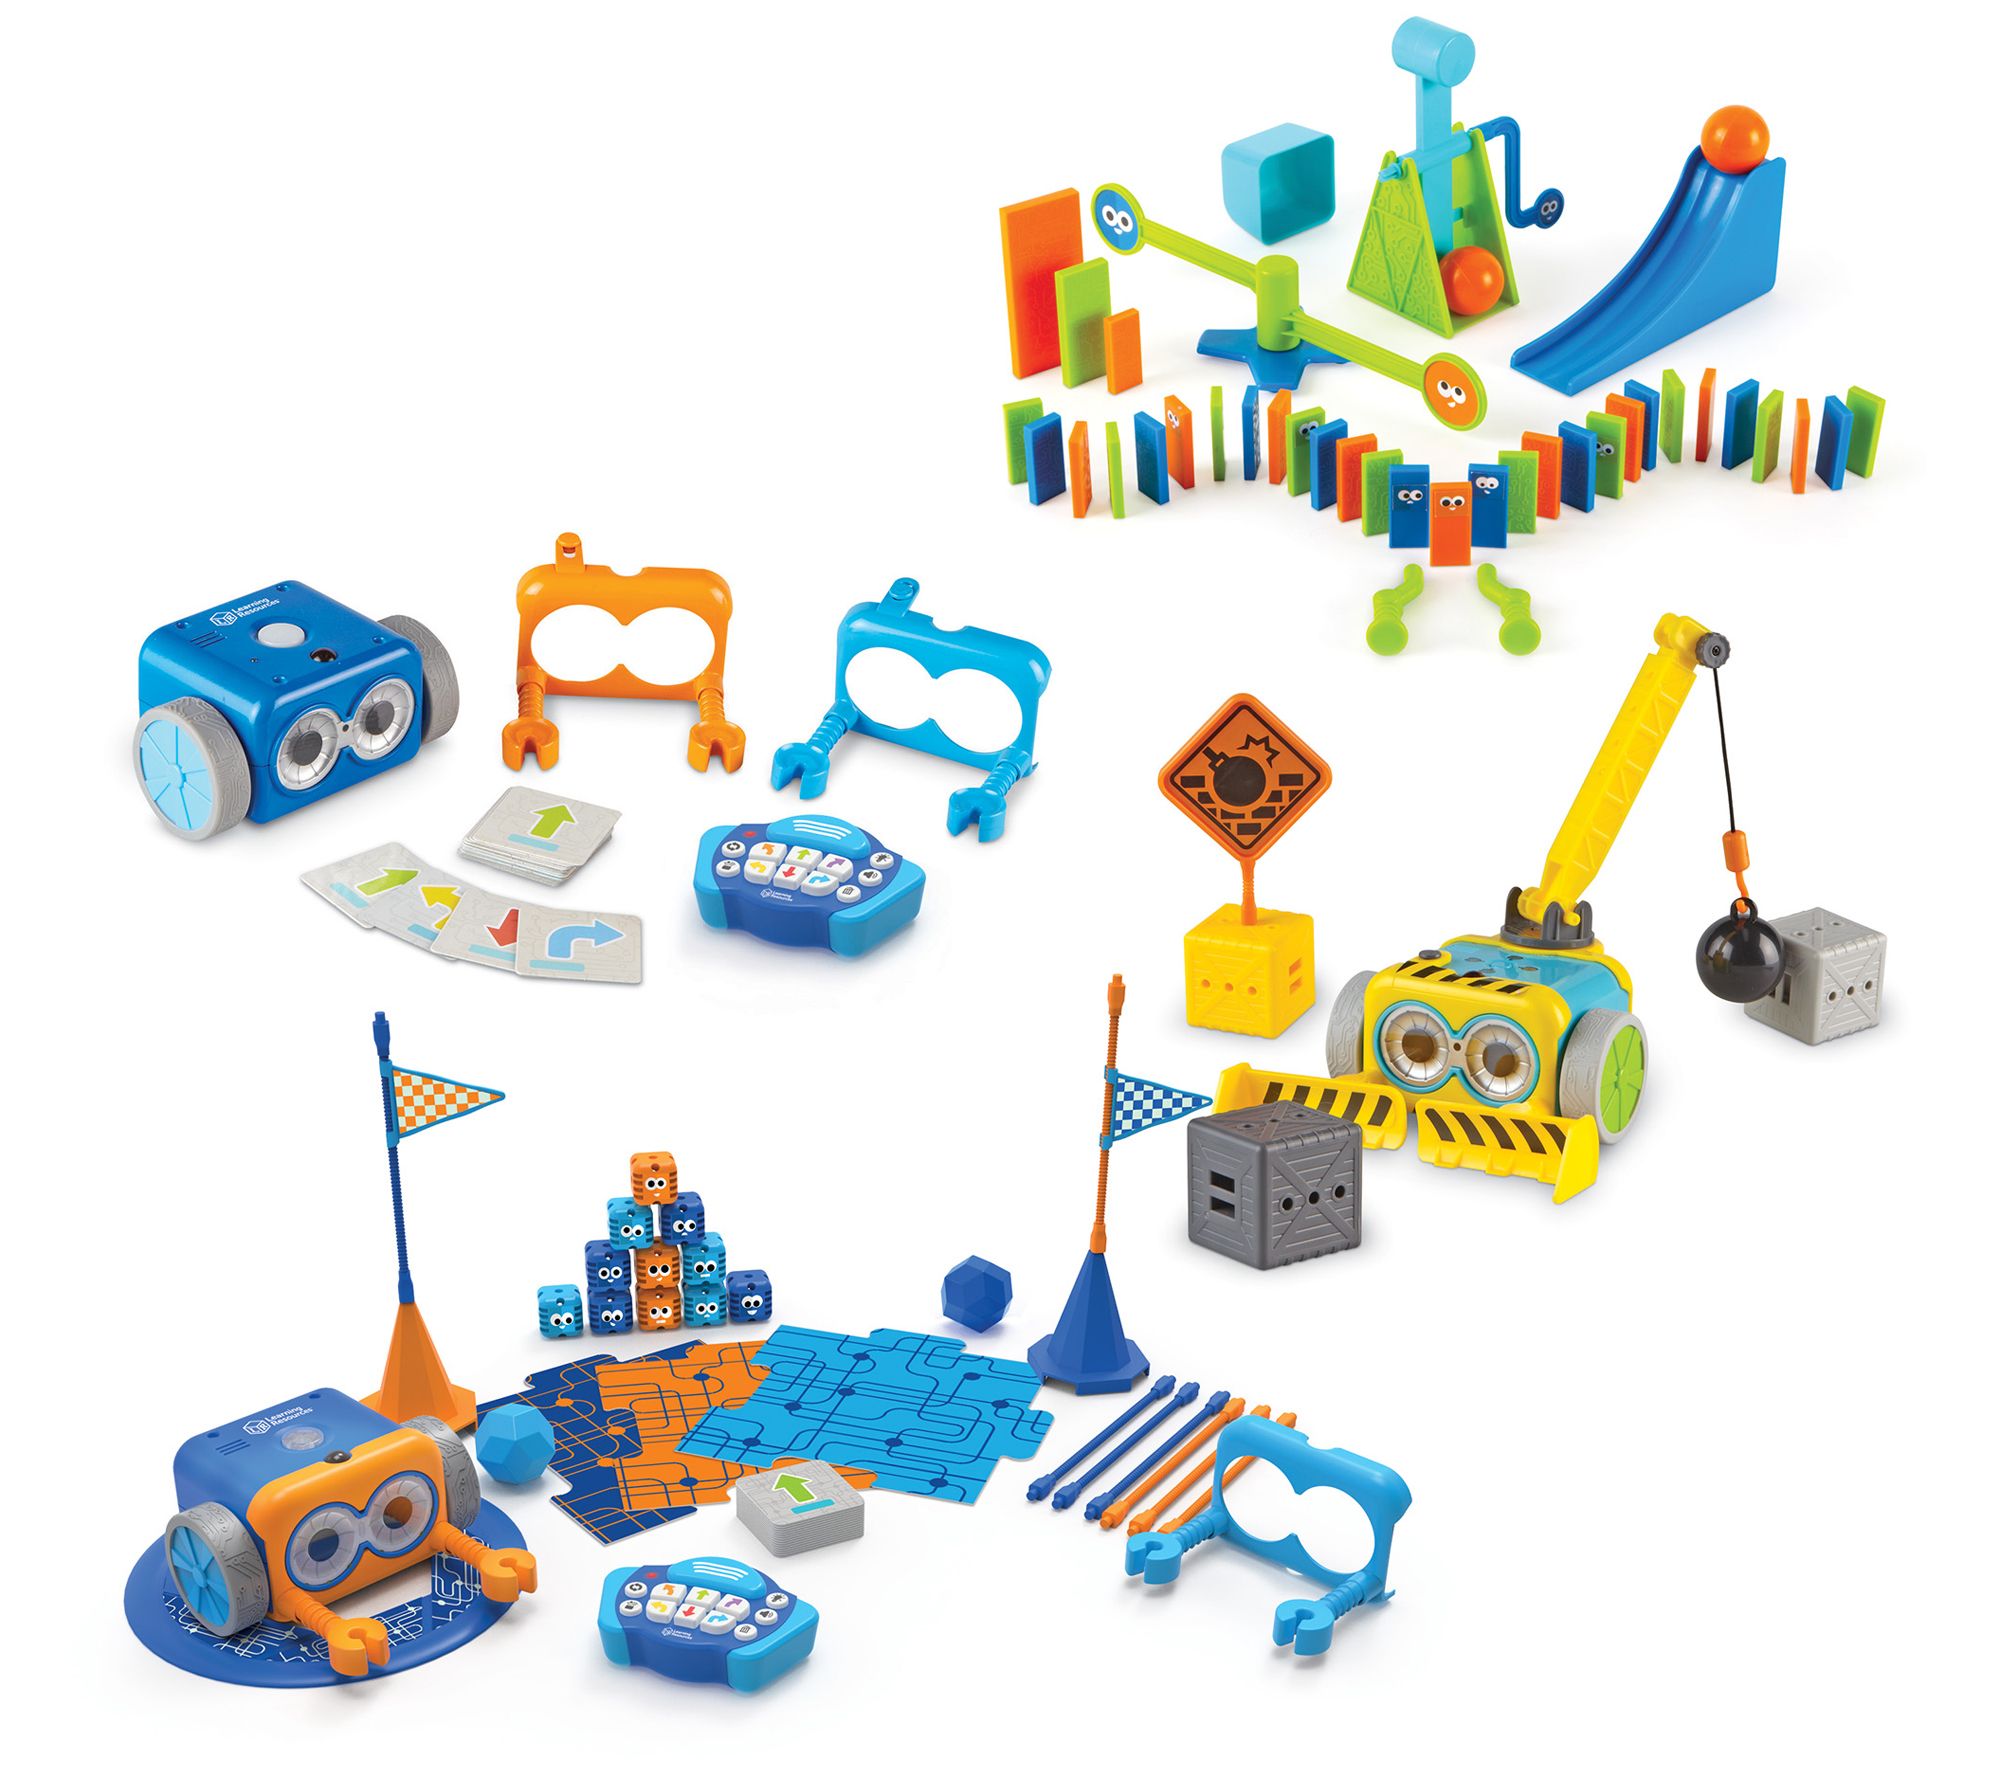 Learning Resources Botley : The Coding Robot Action Challenge Accessory Set